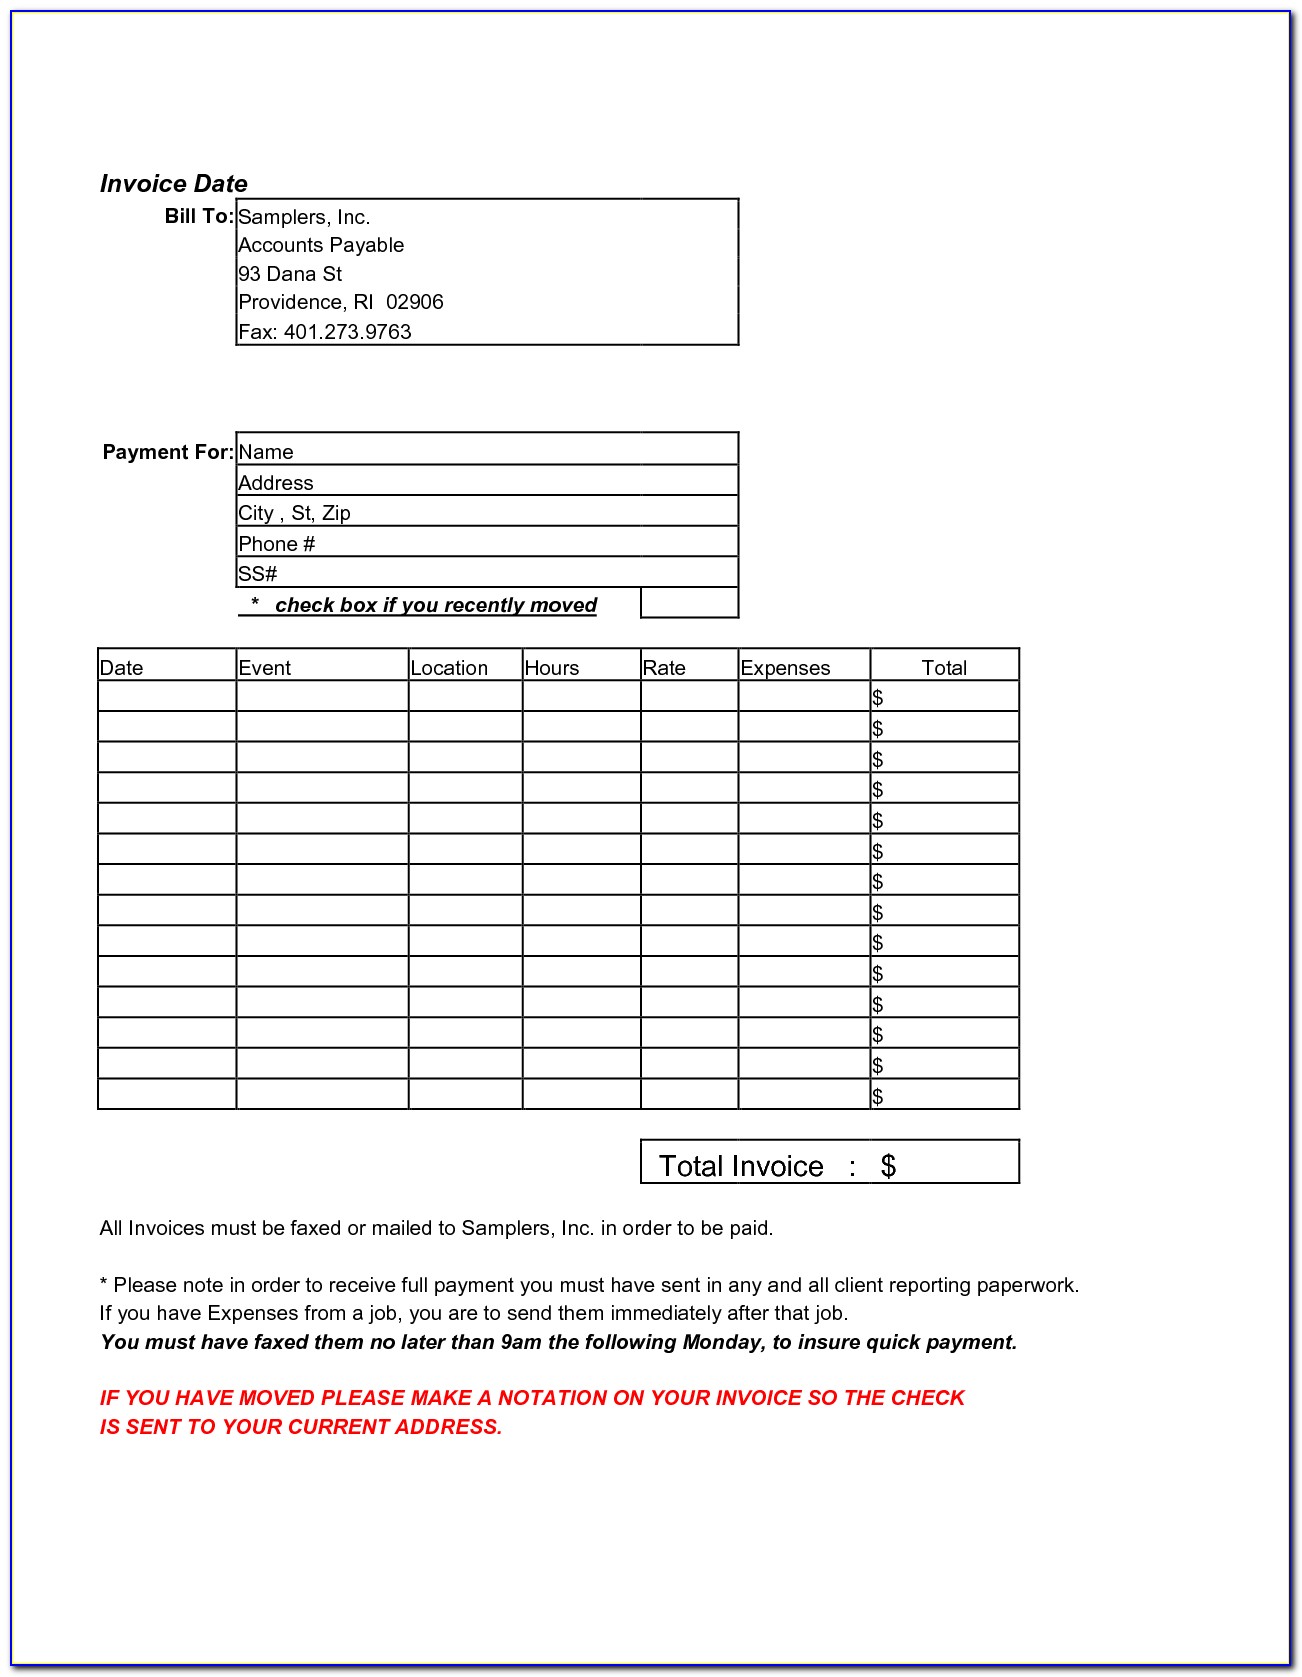 Sample Independent Contractor Invoice